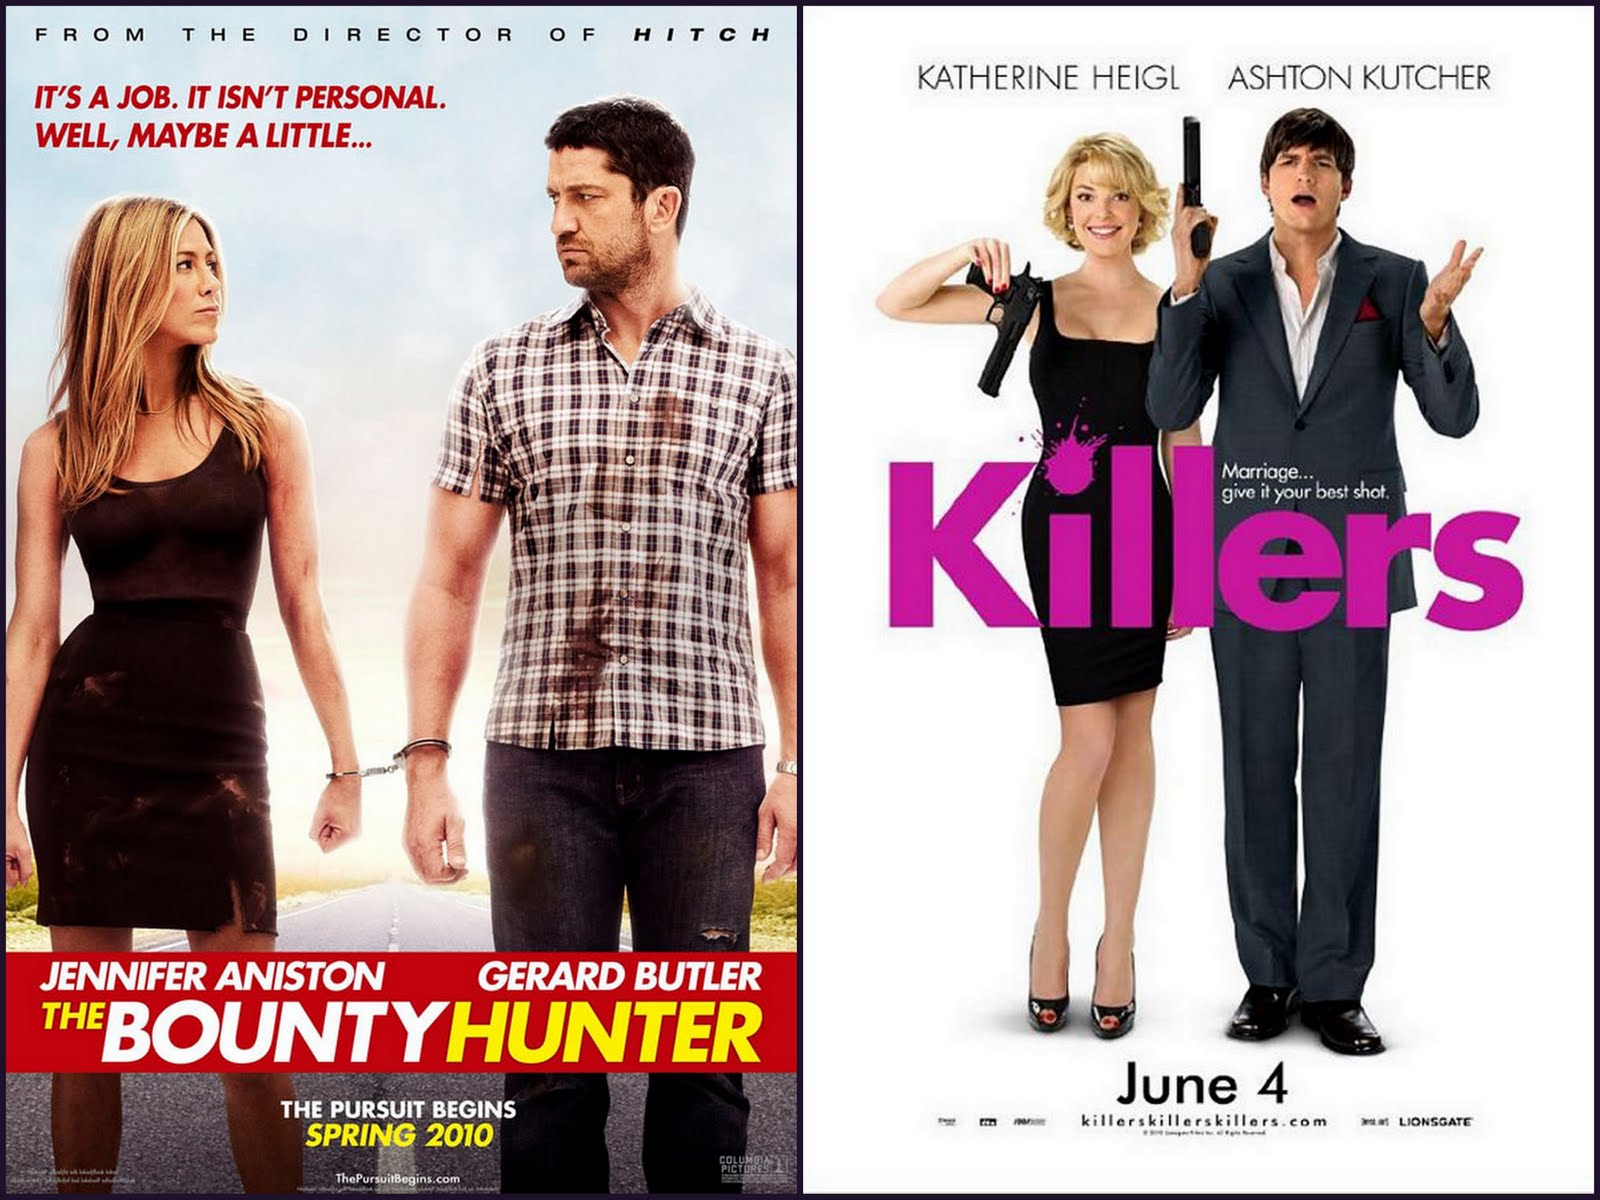 Saturday Review: Bounty Hunters & Killers - Mary Carver